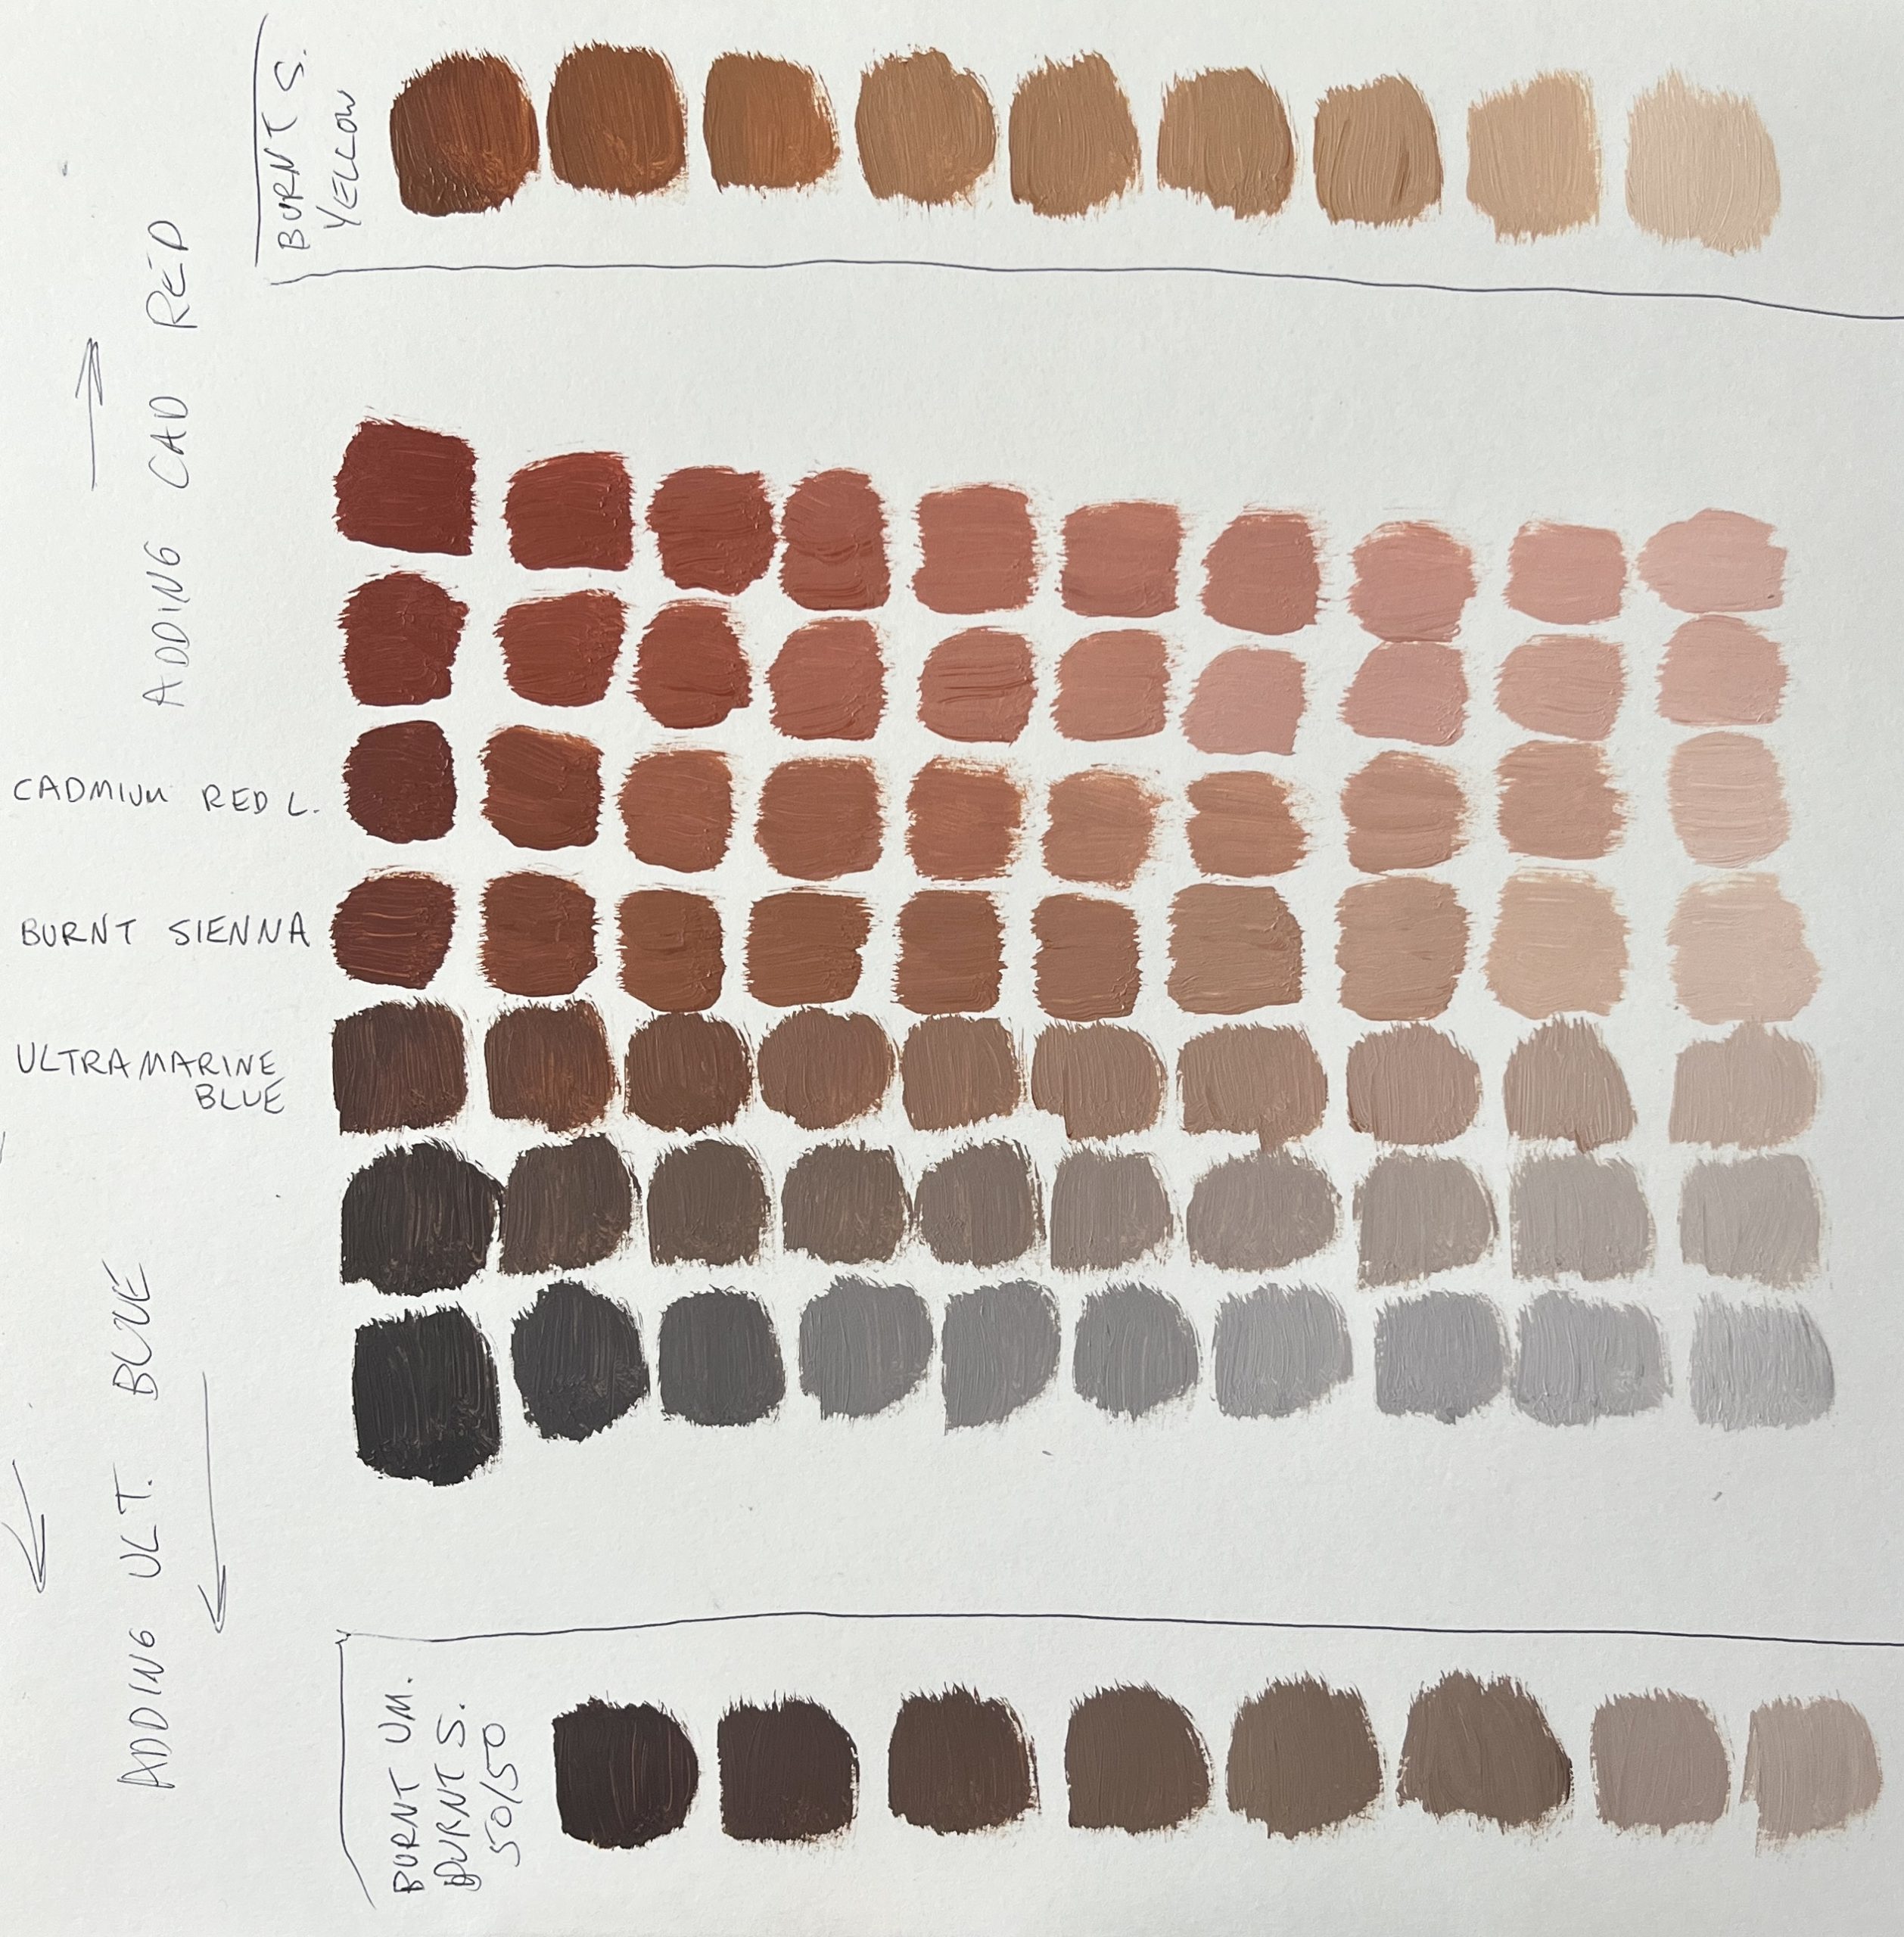 Color Theory/Mixing Week 2 – Skin Tones